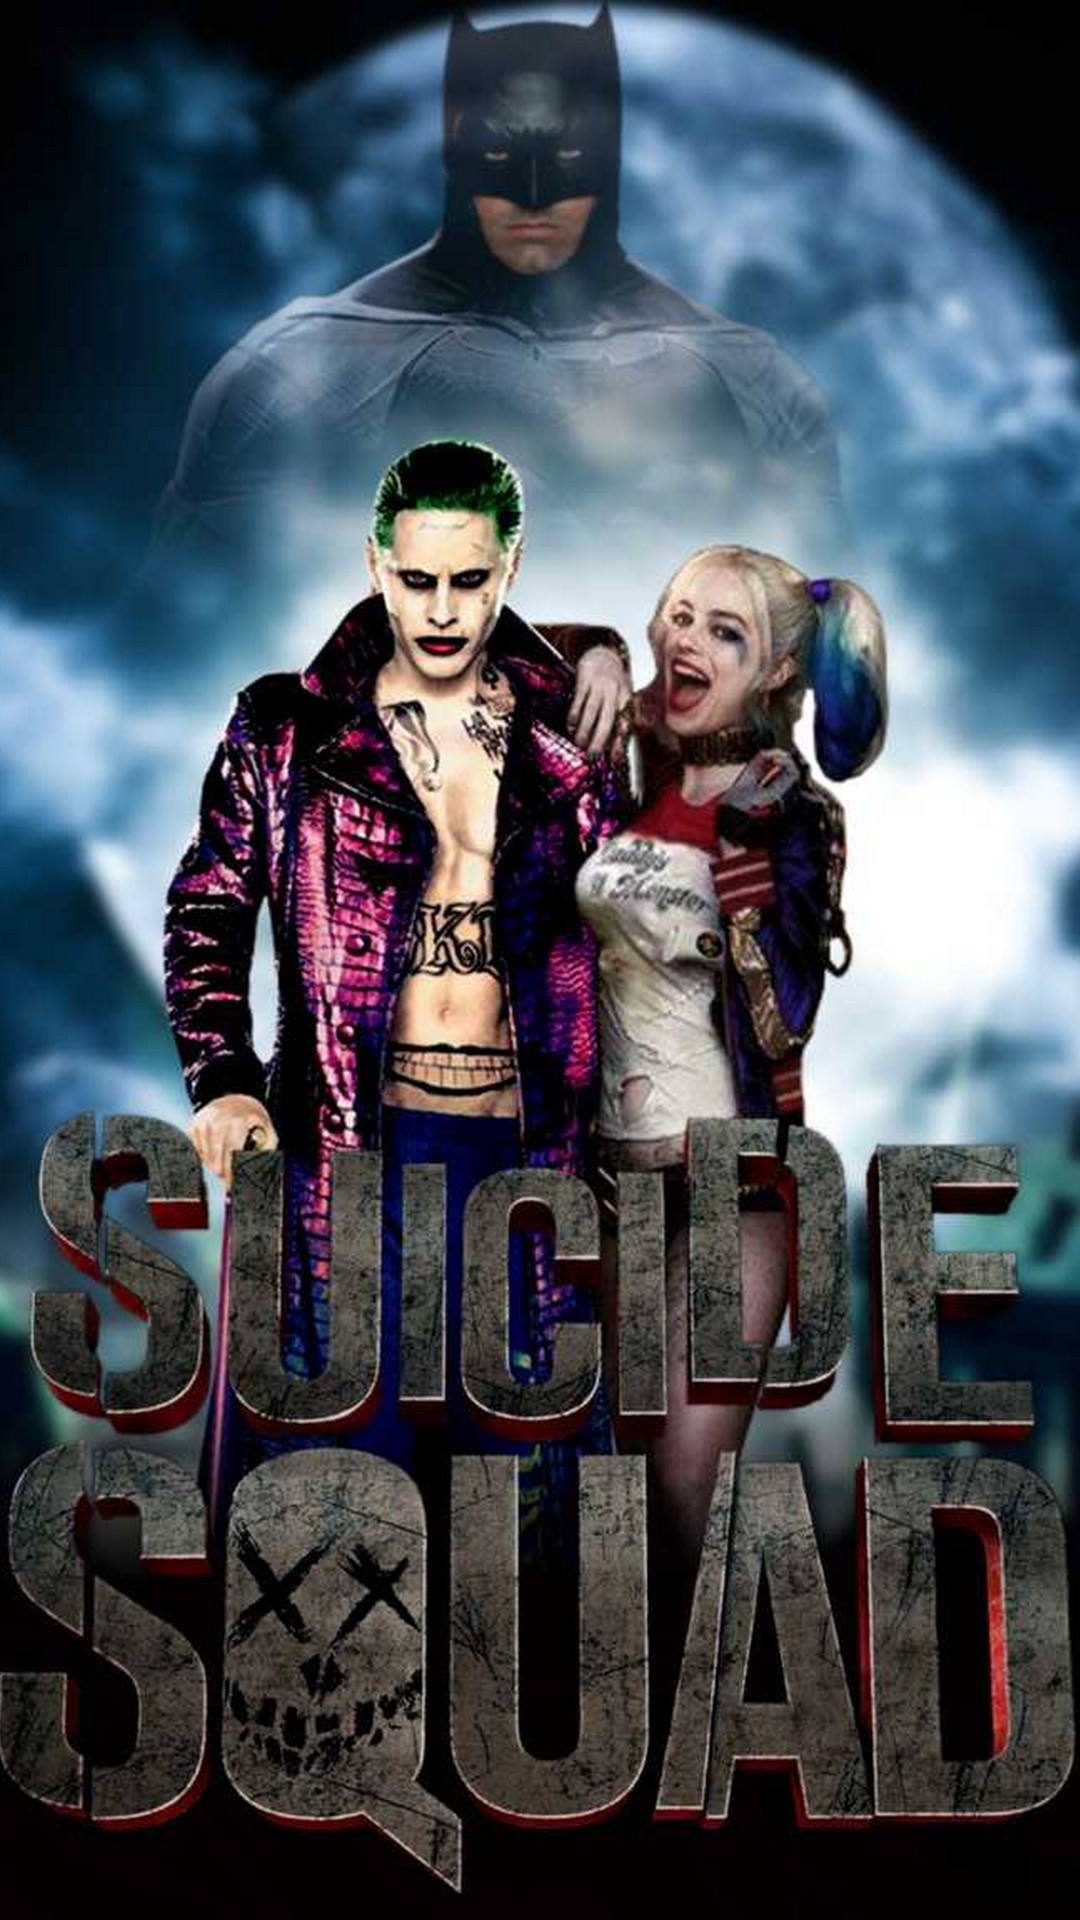 iPhone Wallpaper Harley Quinn and Joker with resolution 1080X1920 pixel. You can make this wallpaper for your iPhone 5, 6, 7, 8, X backgrounds, Mobile Screensaver, or iPad Lock Screen